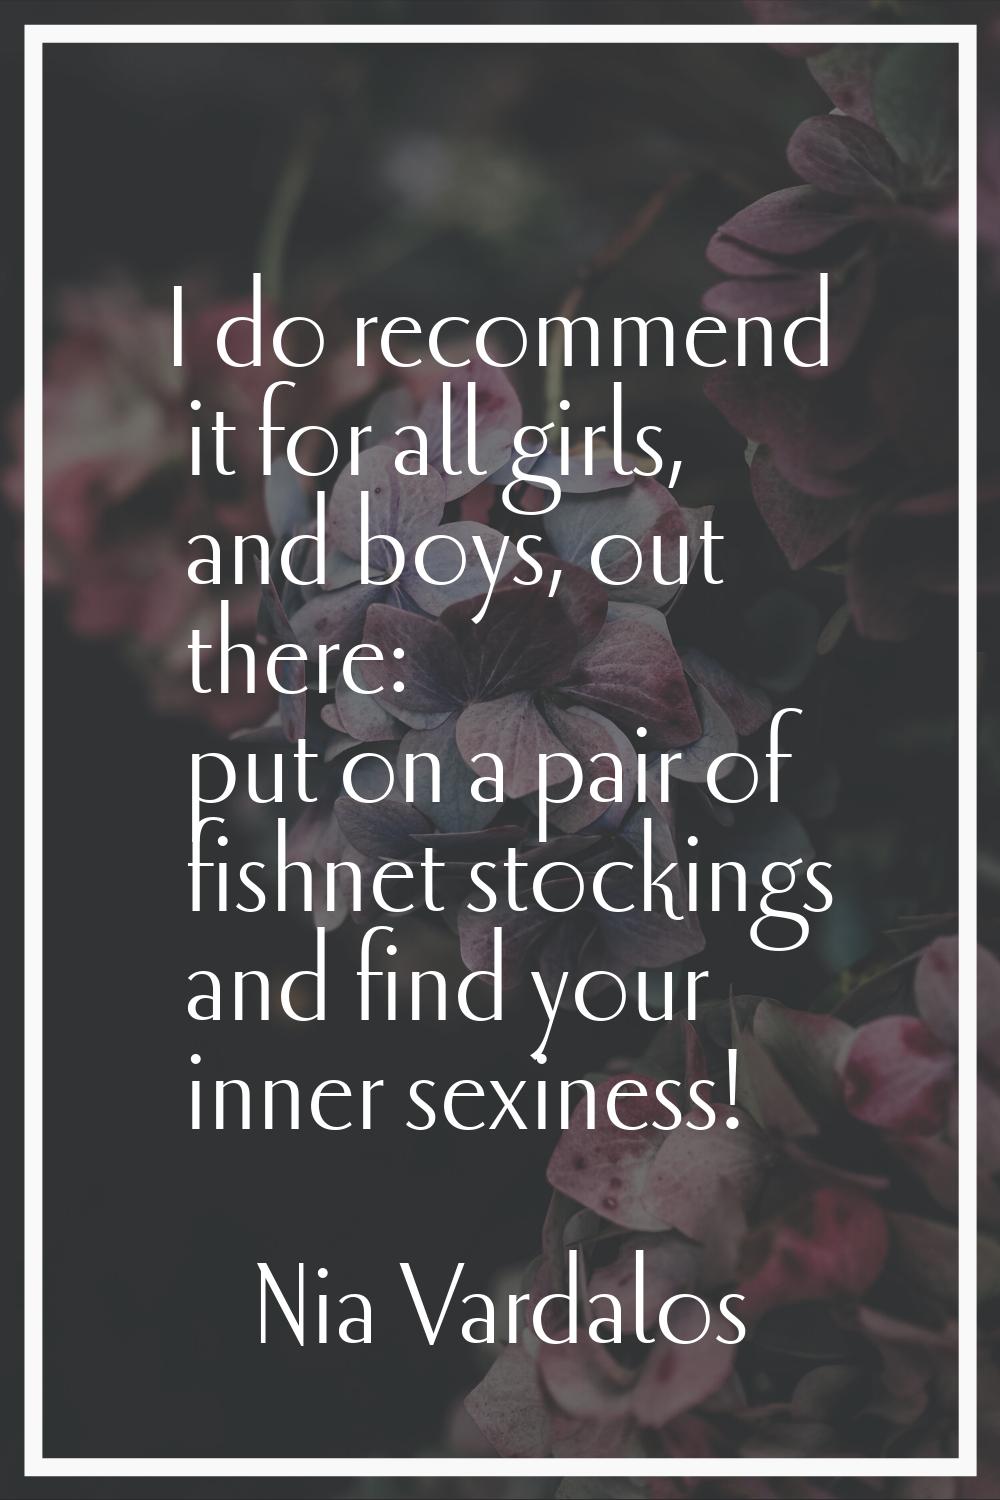 I do recommend it for all girls, and boys, out there: put on a pair of fishnet stockings and find y